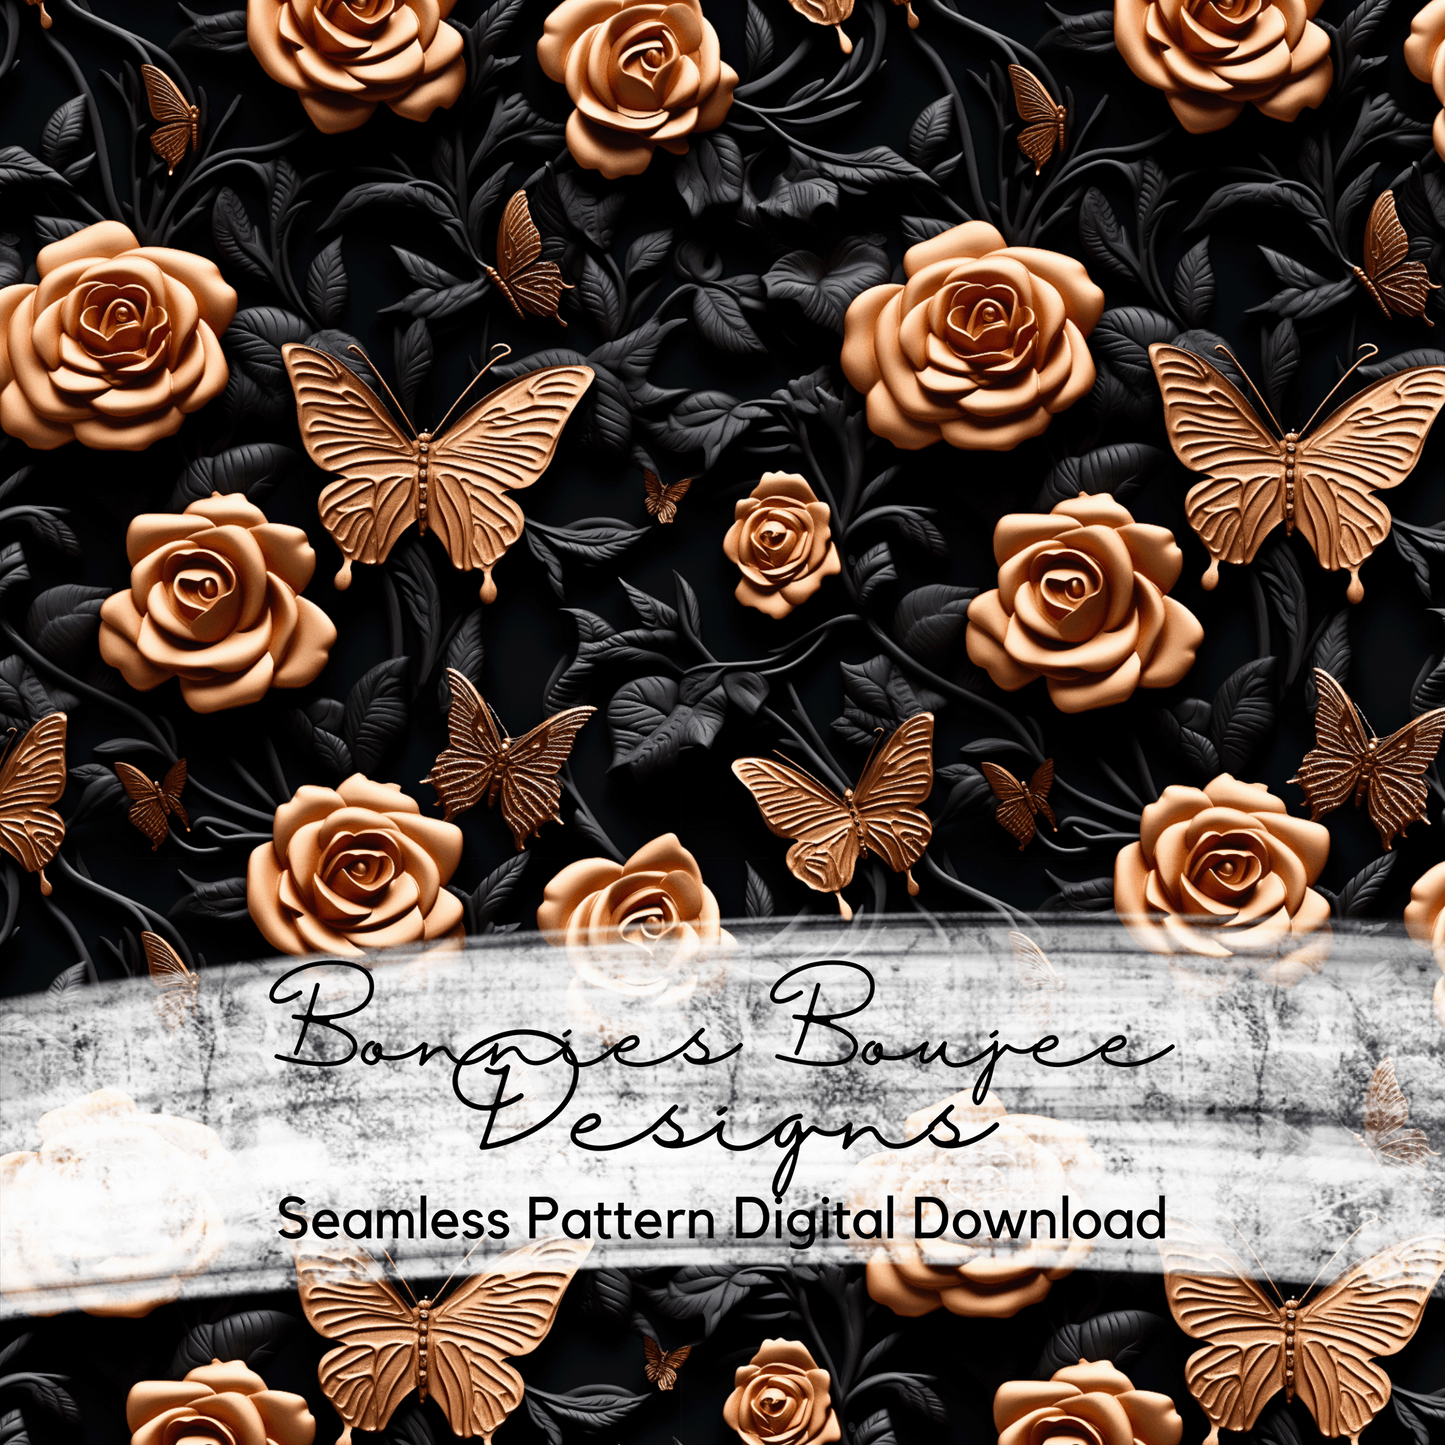 Textured Roses and Butterflies with dark foliage Seamless File